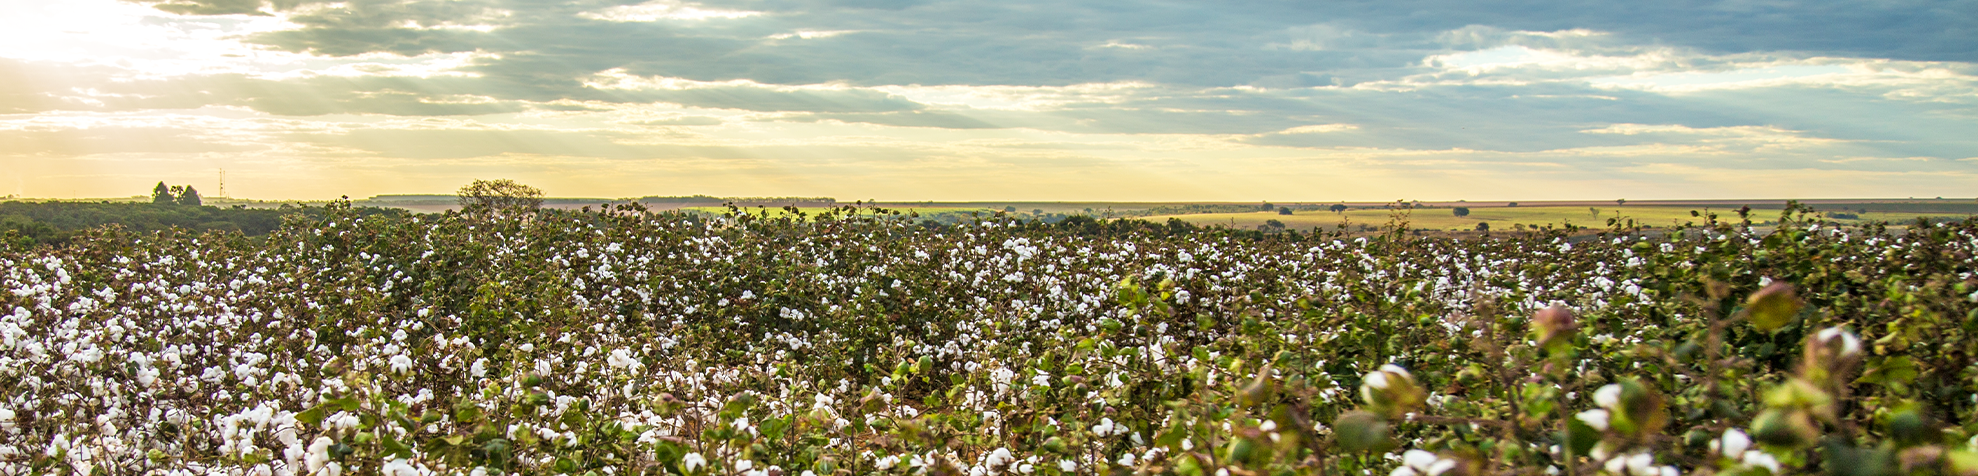 Overlook of cotton field at harvest in late afternoon sun